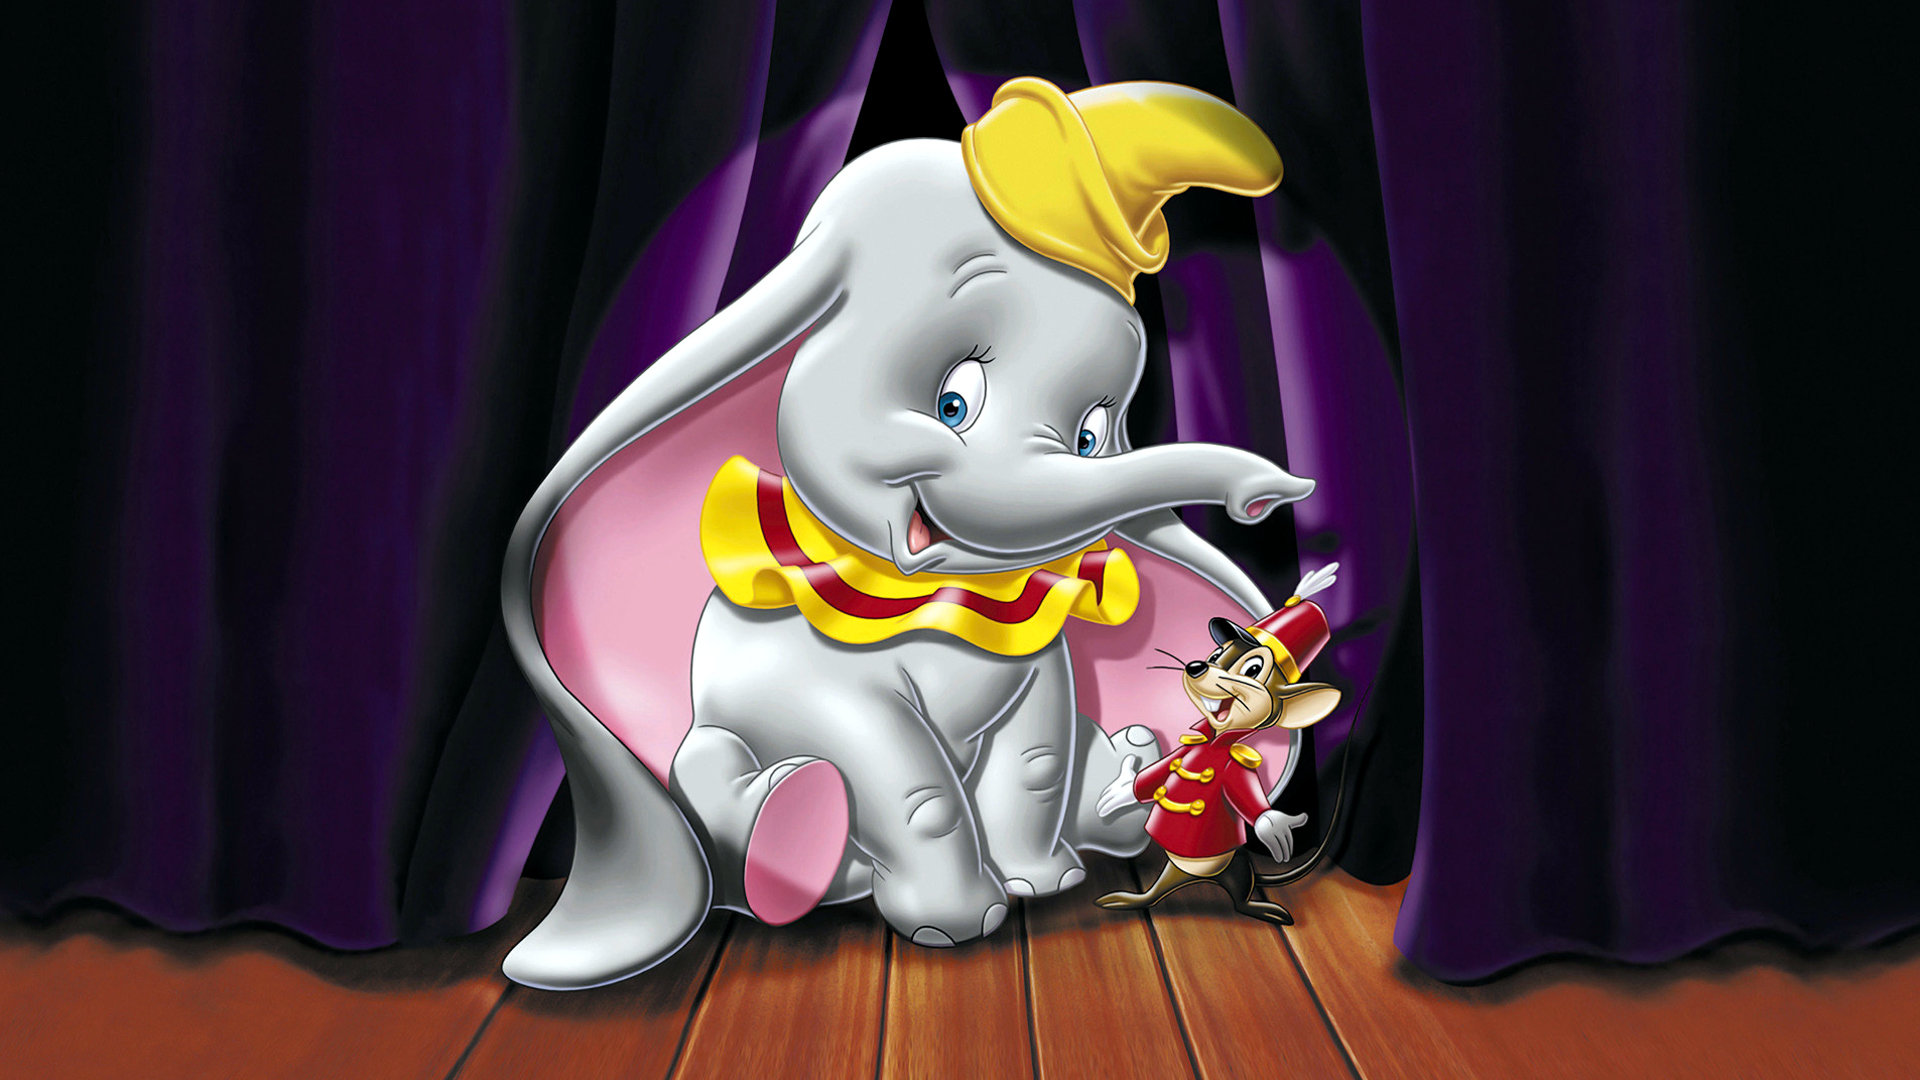 Download 1080p Dumbo PC wallpaper ID:397266 for free